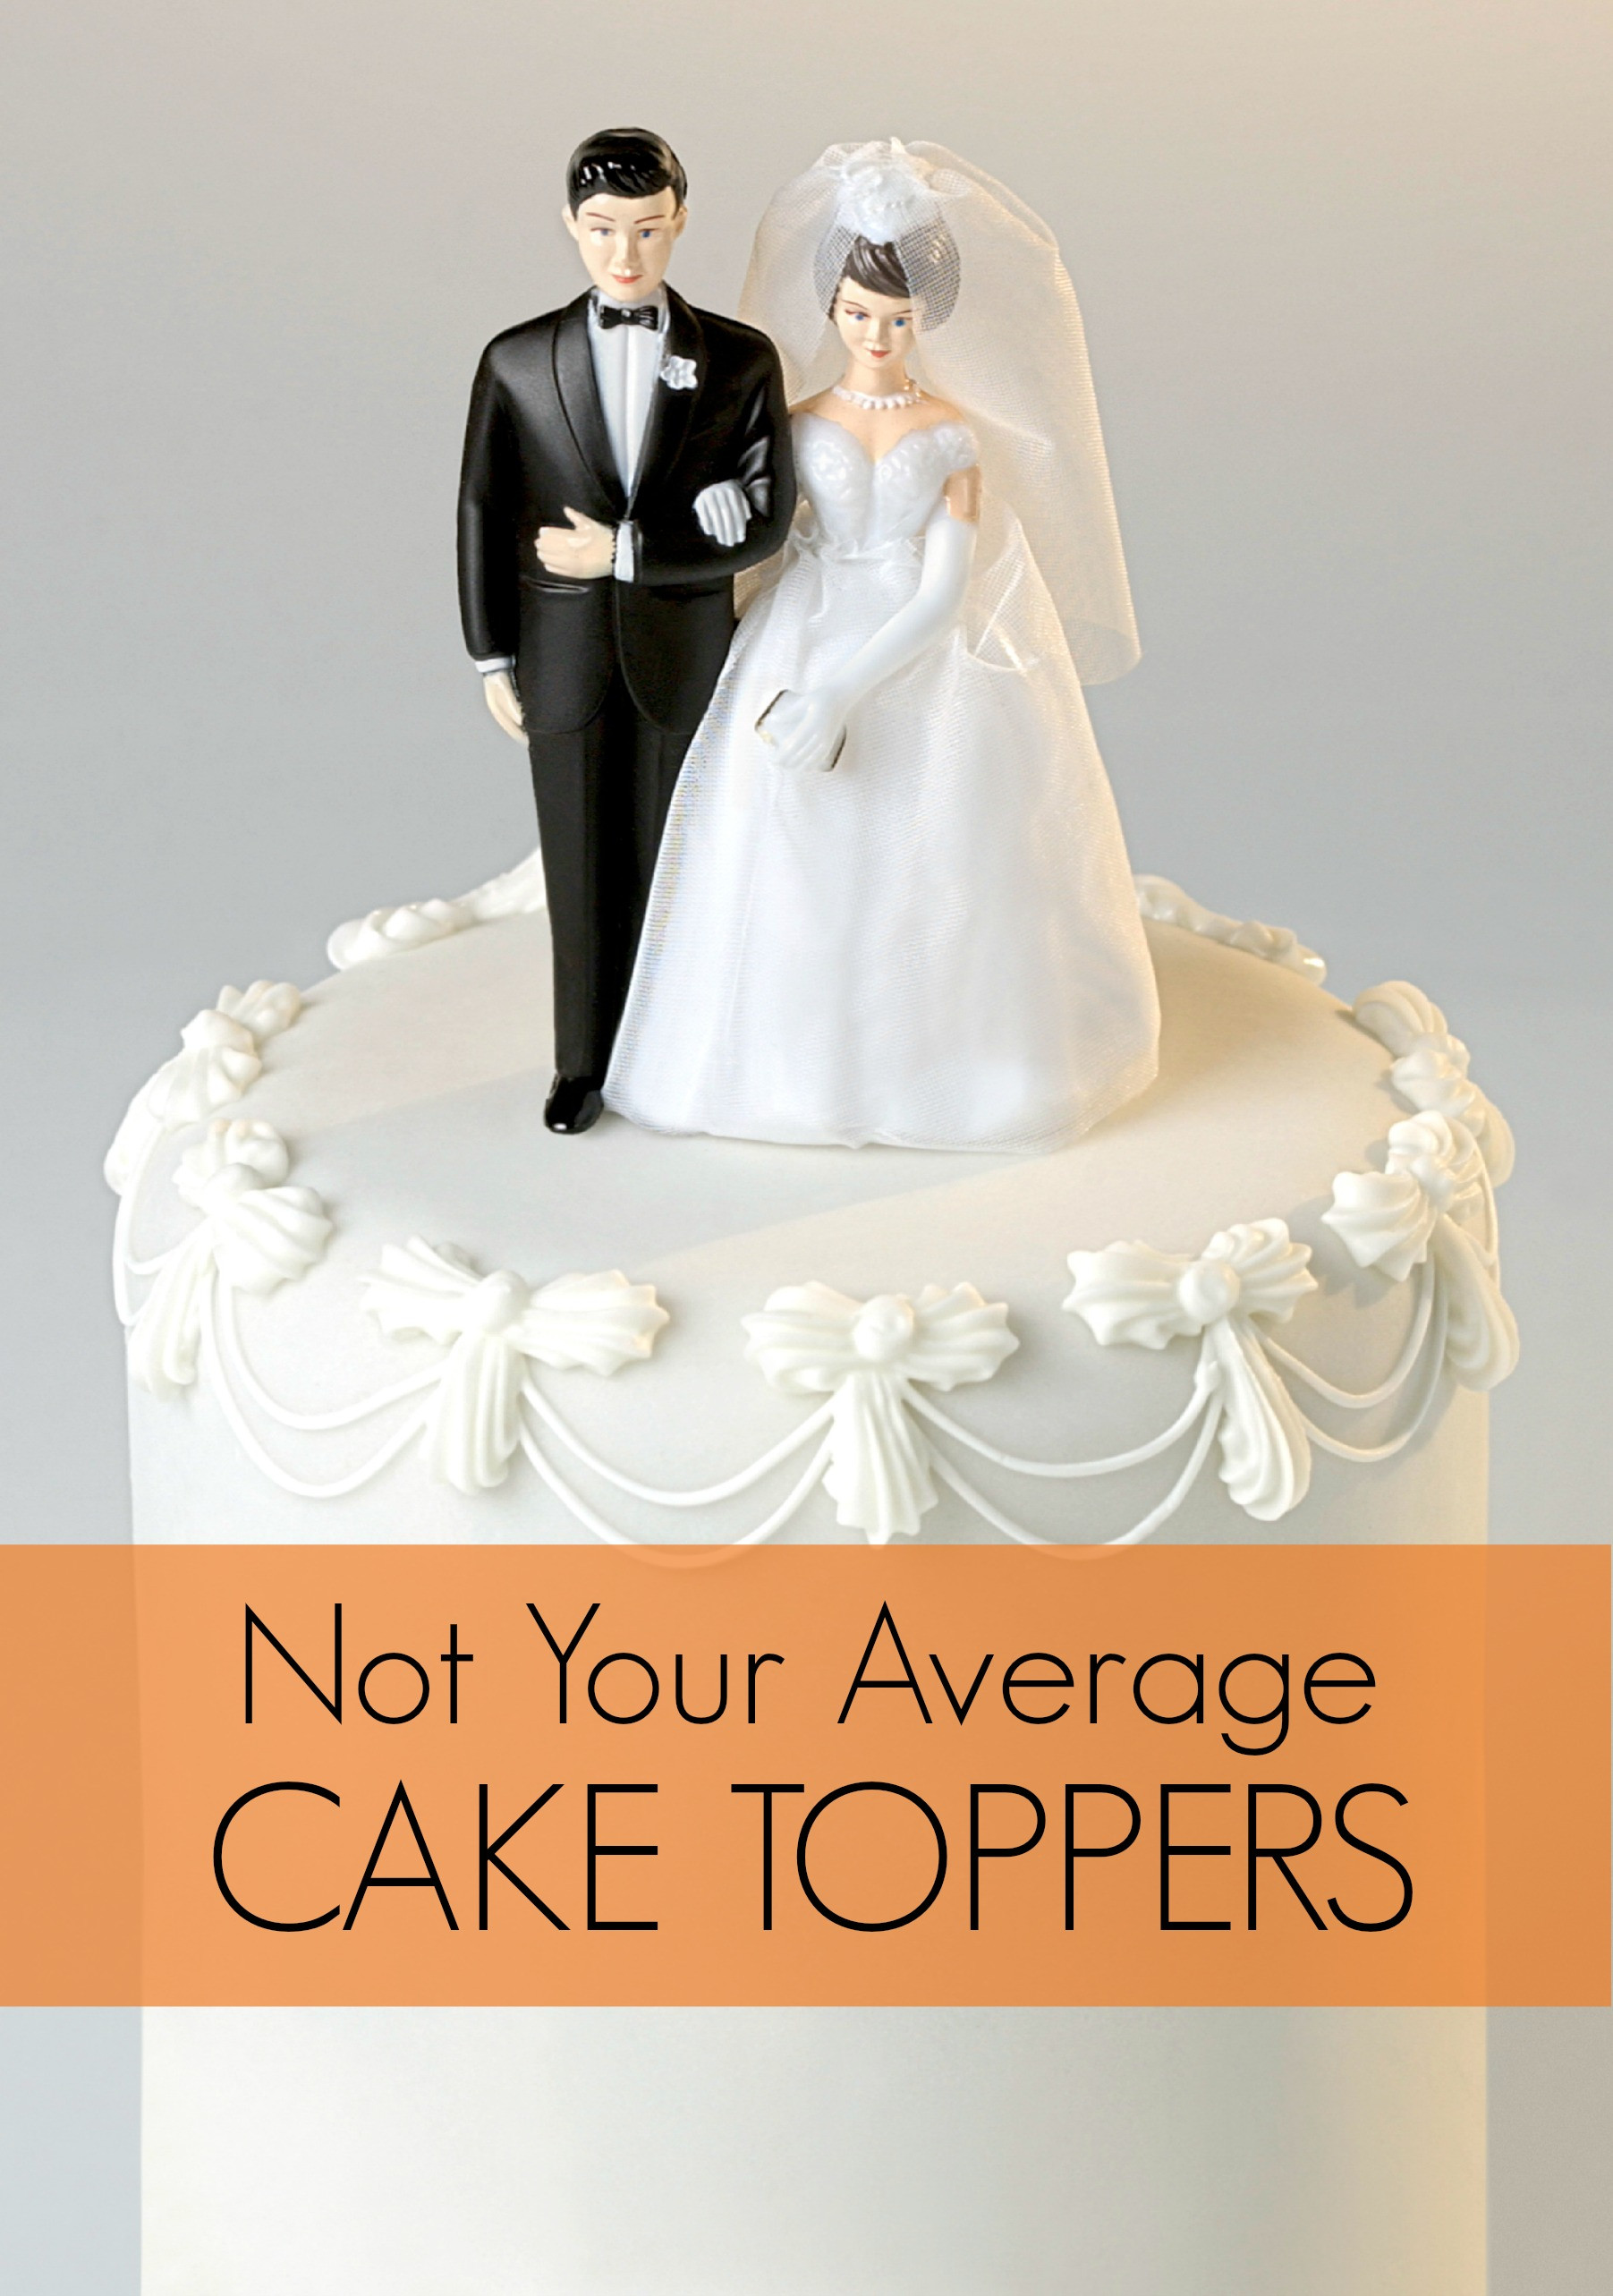 Wedding Cakes Tops
 Not Your Average Cake Toppers